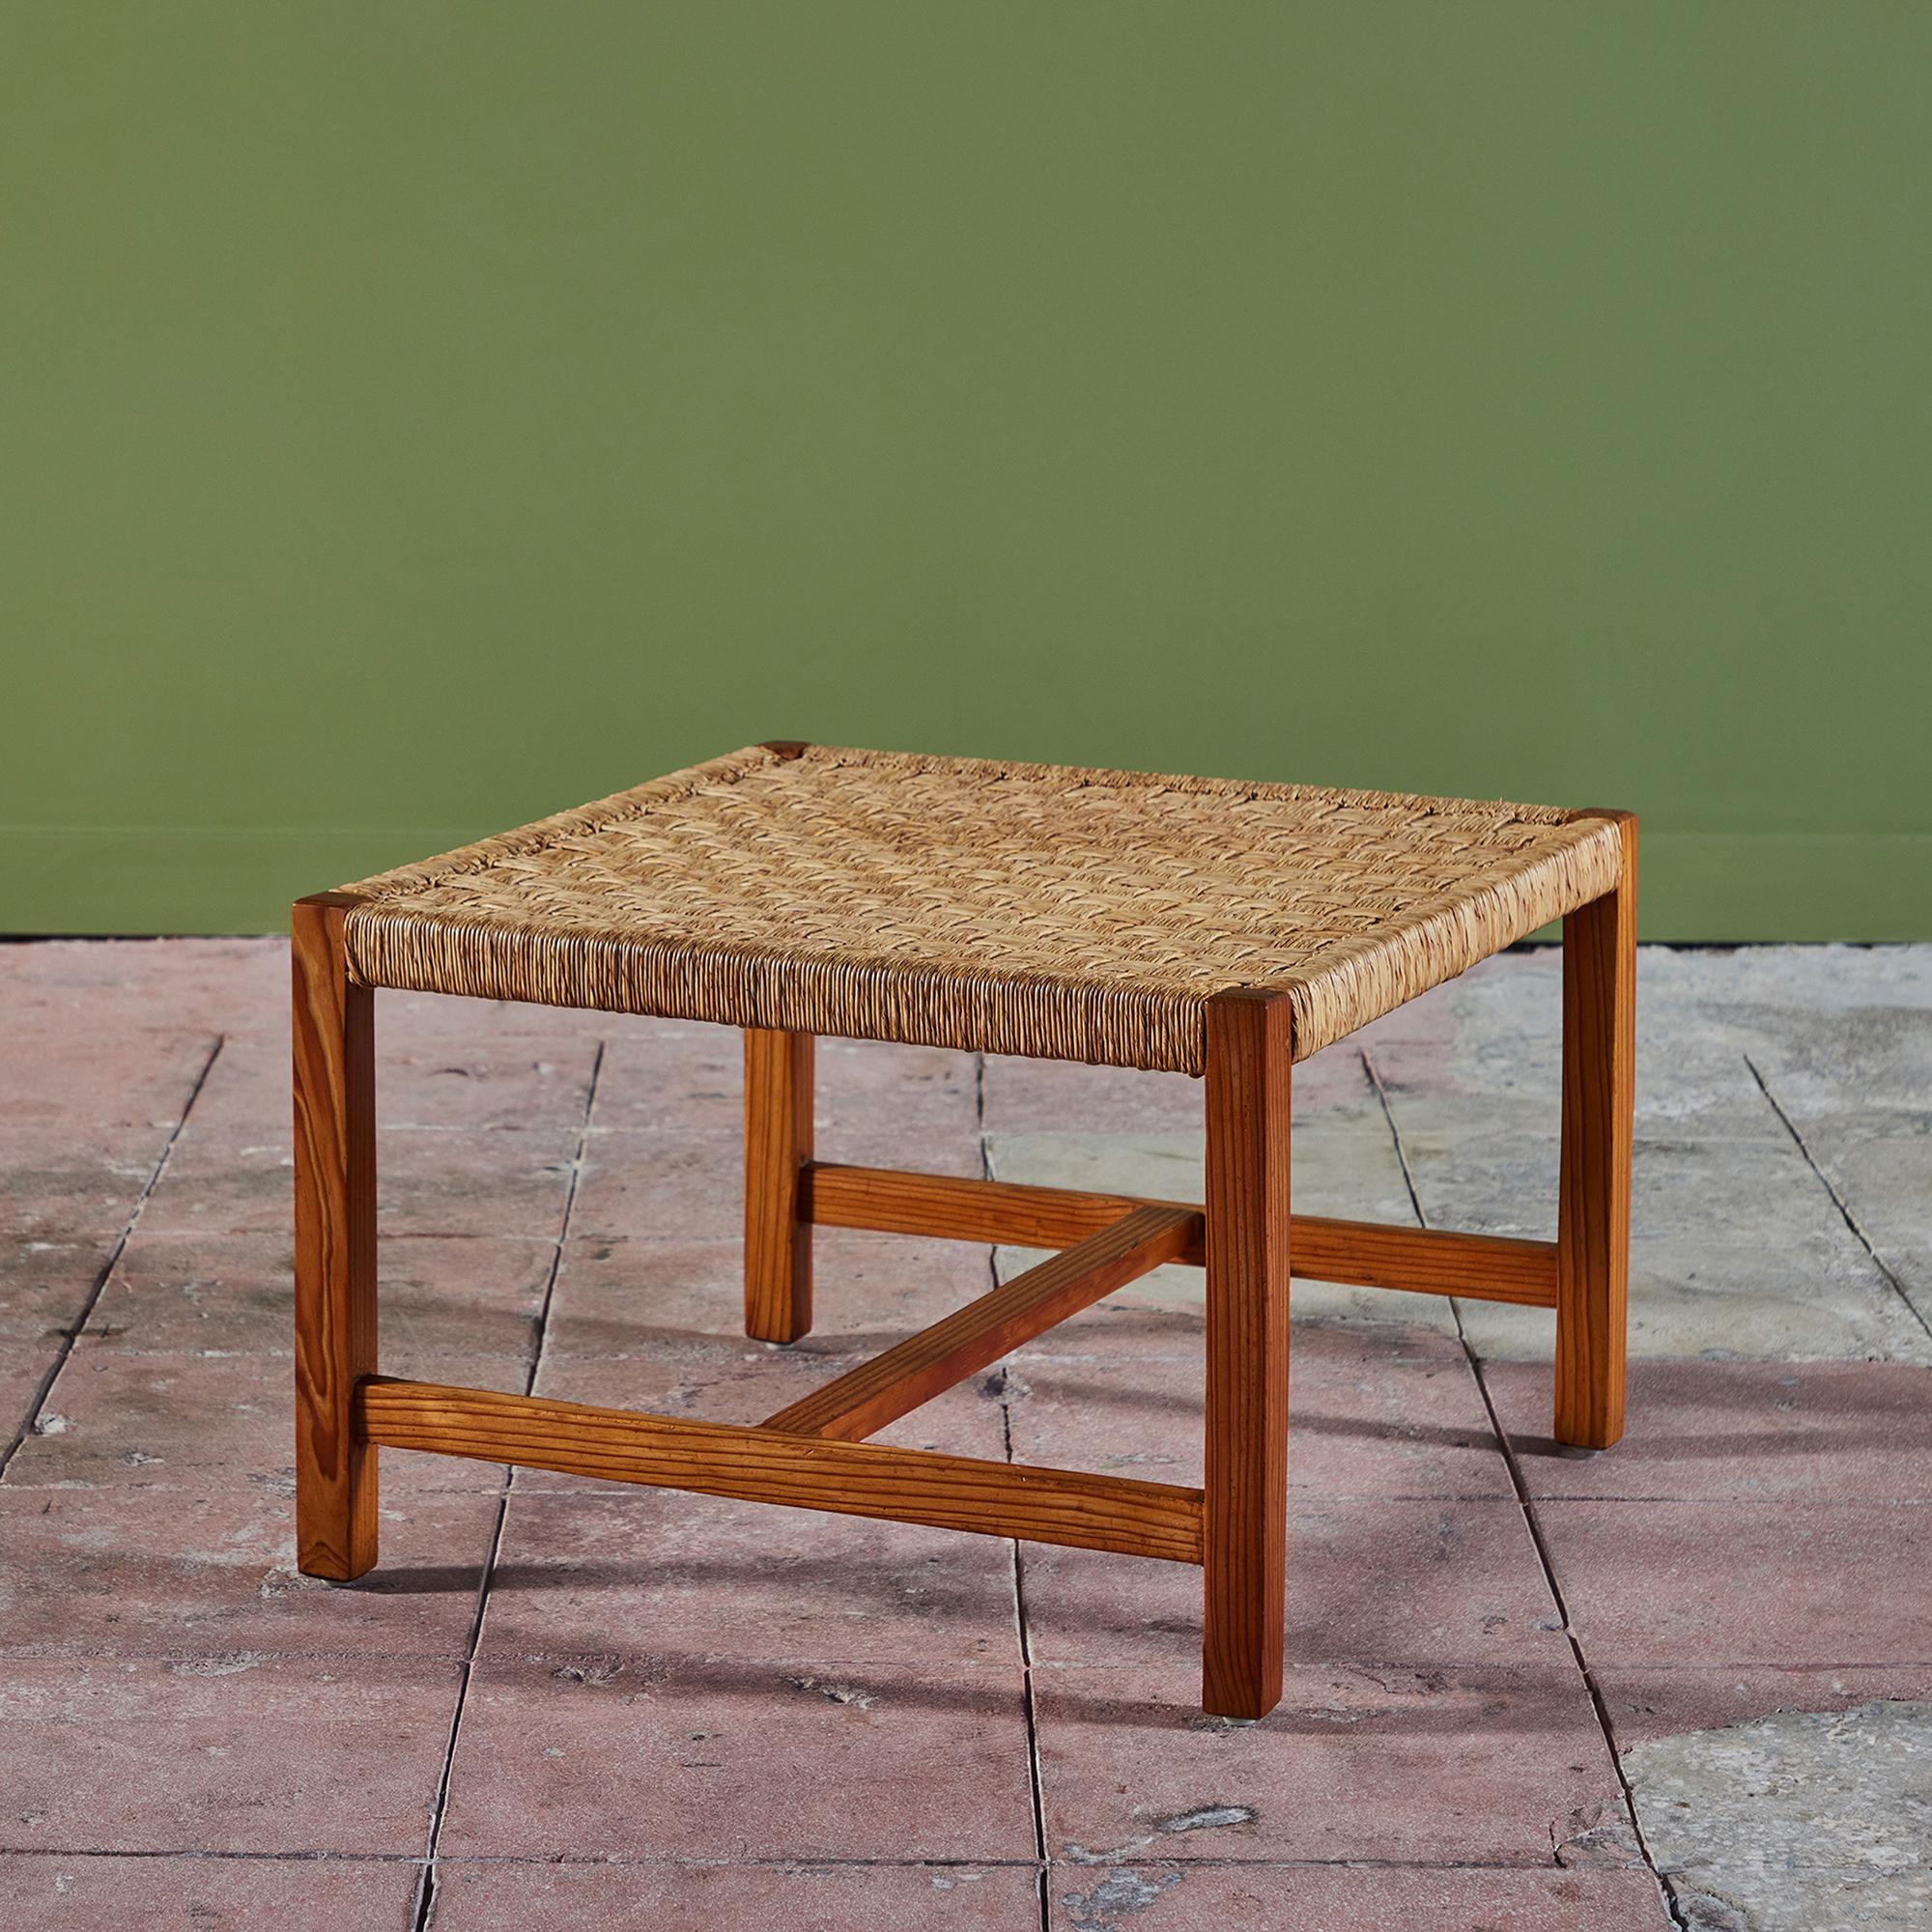 Bauhaus trained, Mexico City based desiger, Michael Van Beuren created highly functional modern pieces inspired by Mexican vernacular styles and materials. This example, c.1950s, Mexico has a pine frame with a woven rattan table top resembling a